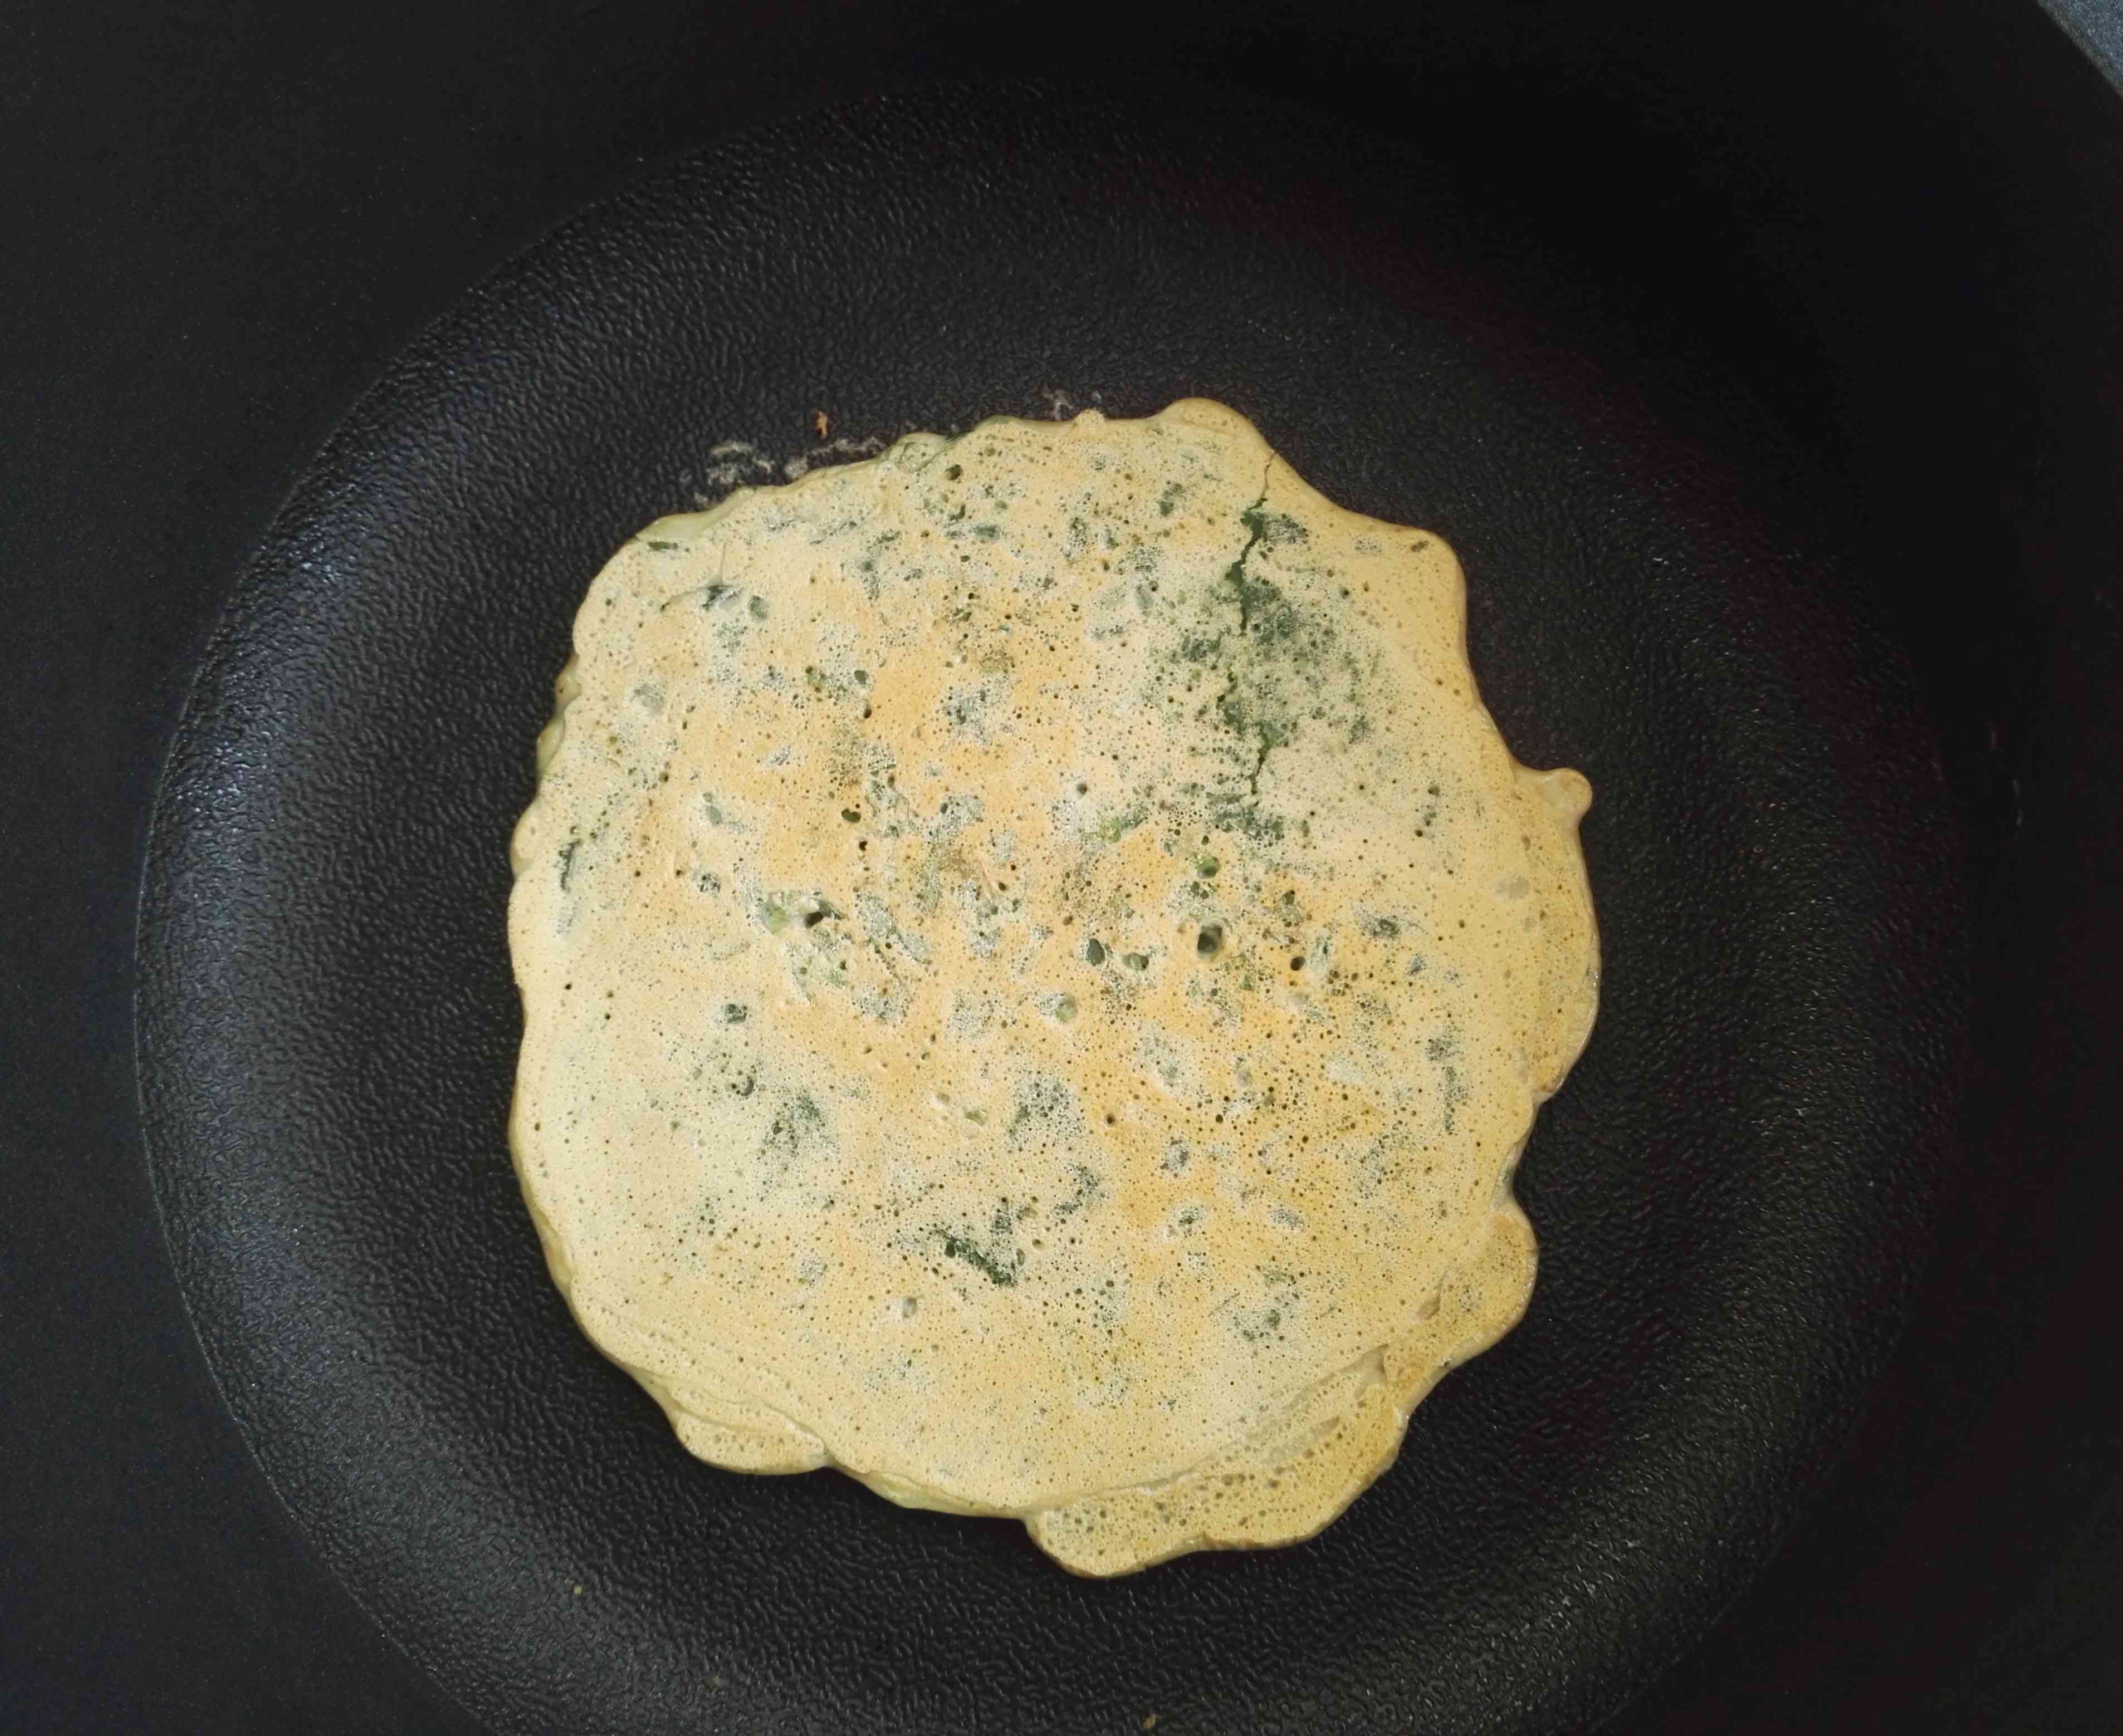 For The Delicacy, The Collision of Vinaigrette and Wild Vegetable Omelet recipe